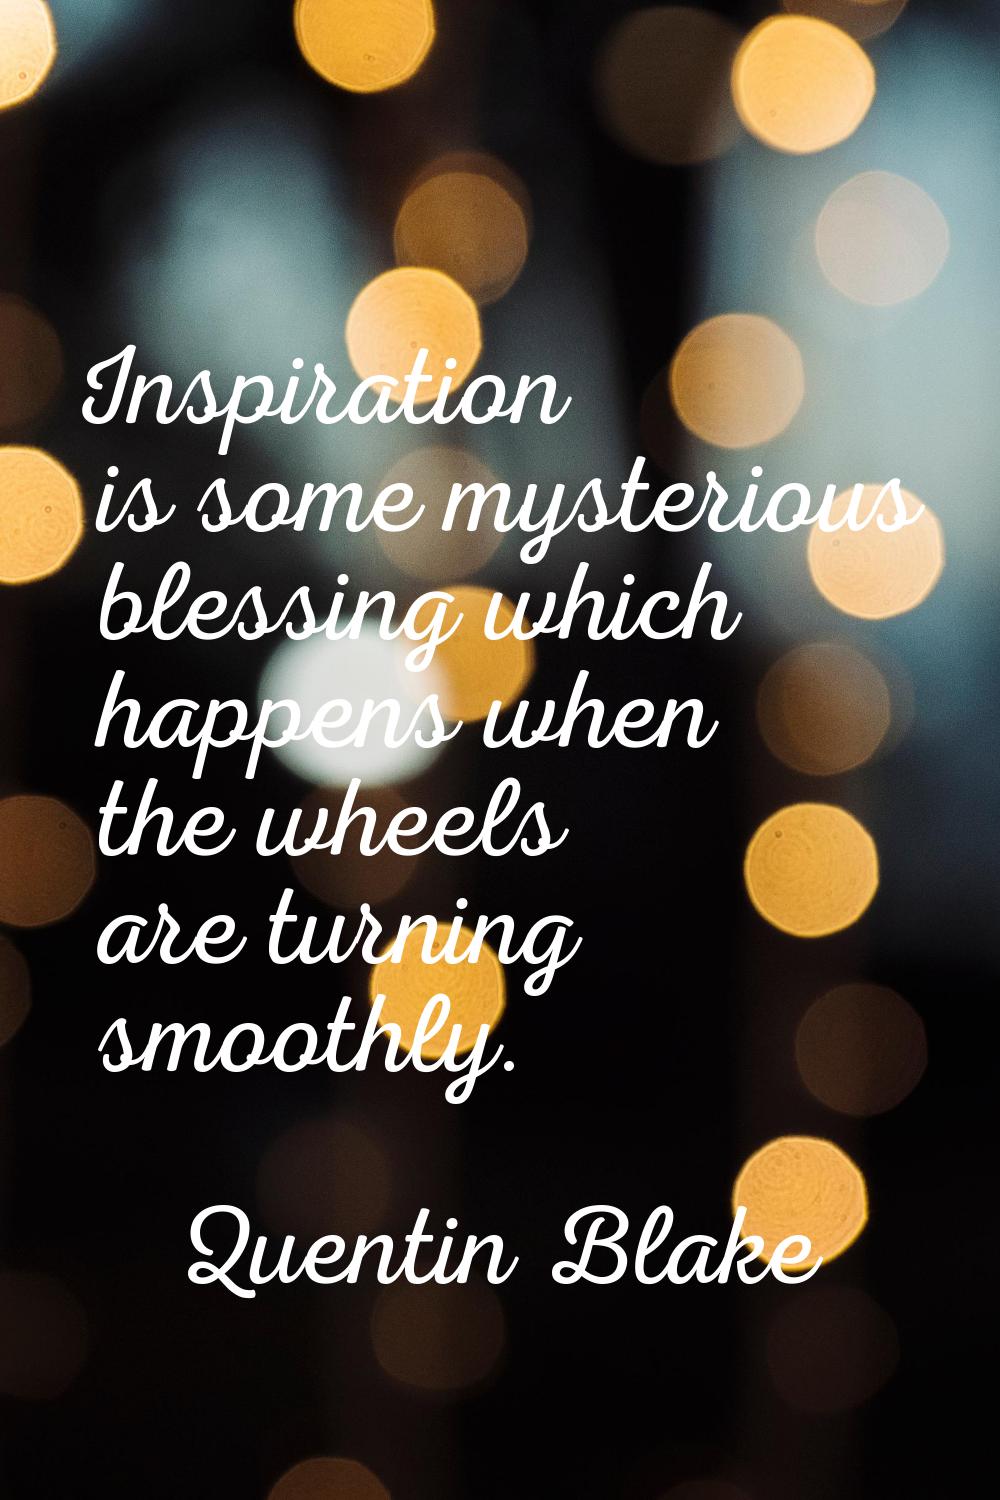 Inspiration is some mysterious blessing which happens when the wheels are turning smoothly.